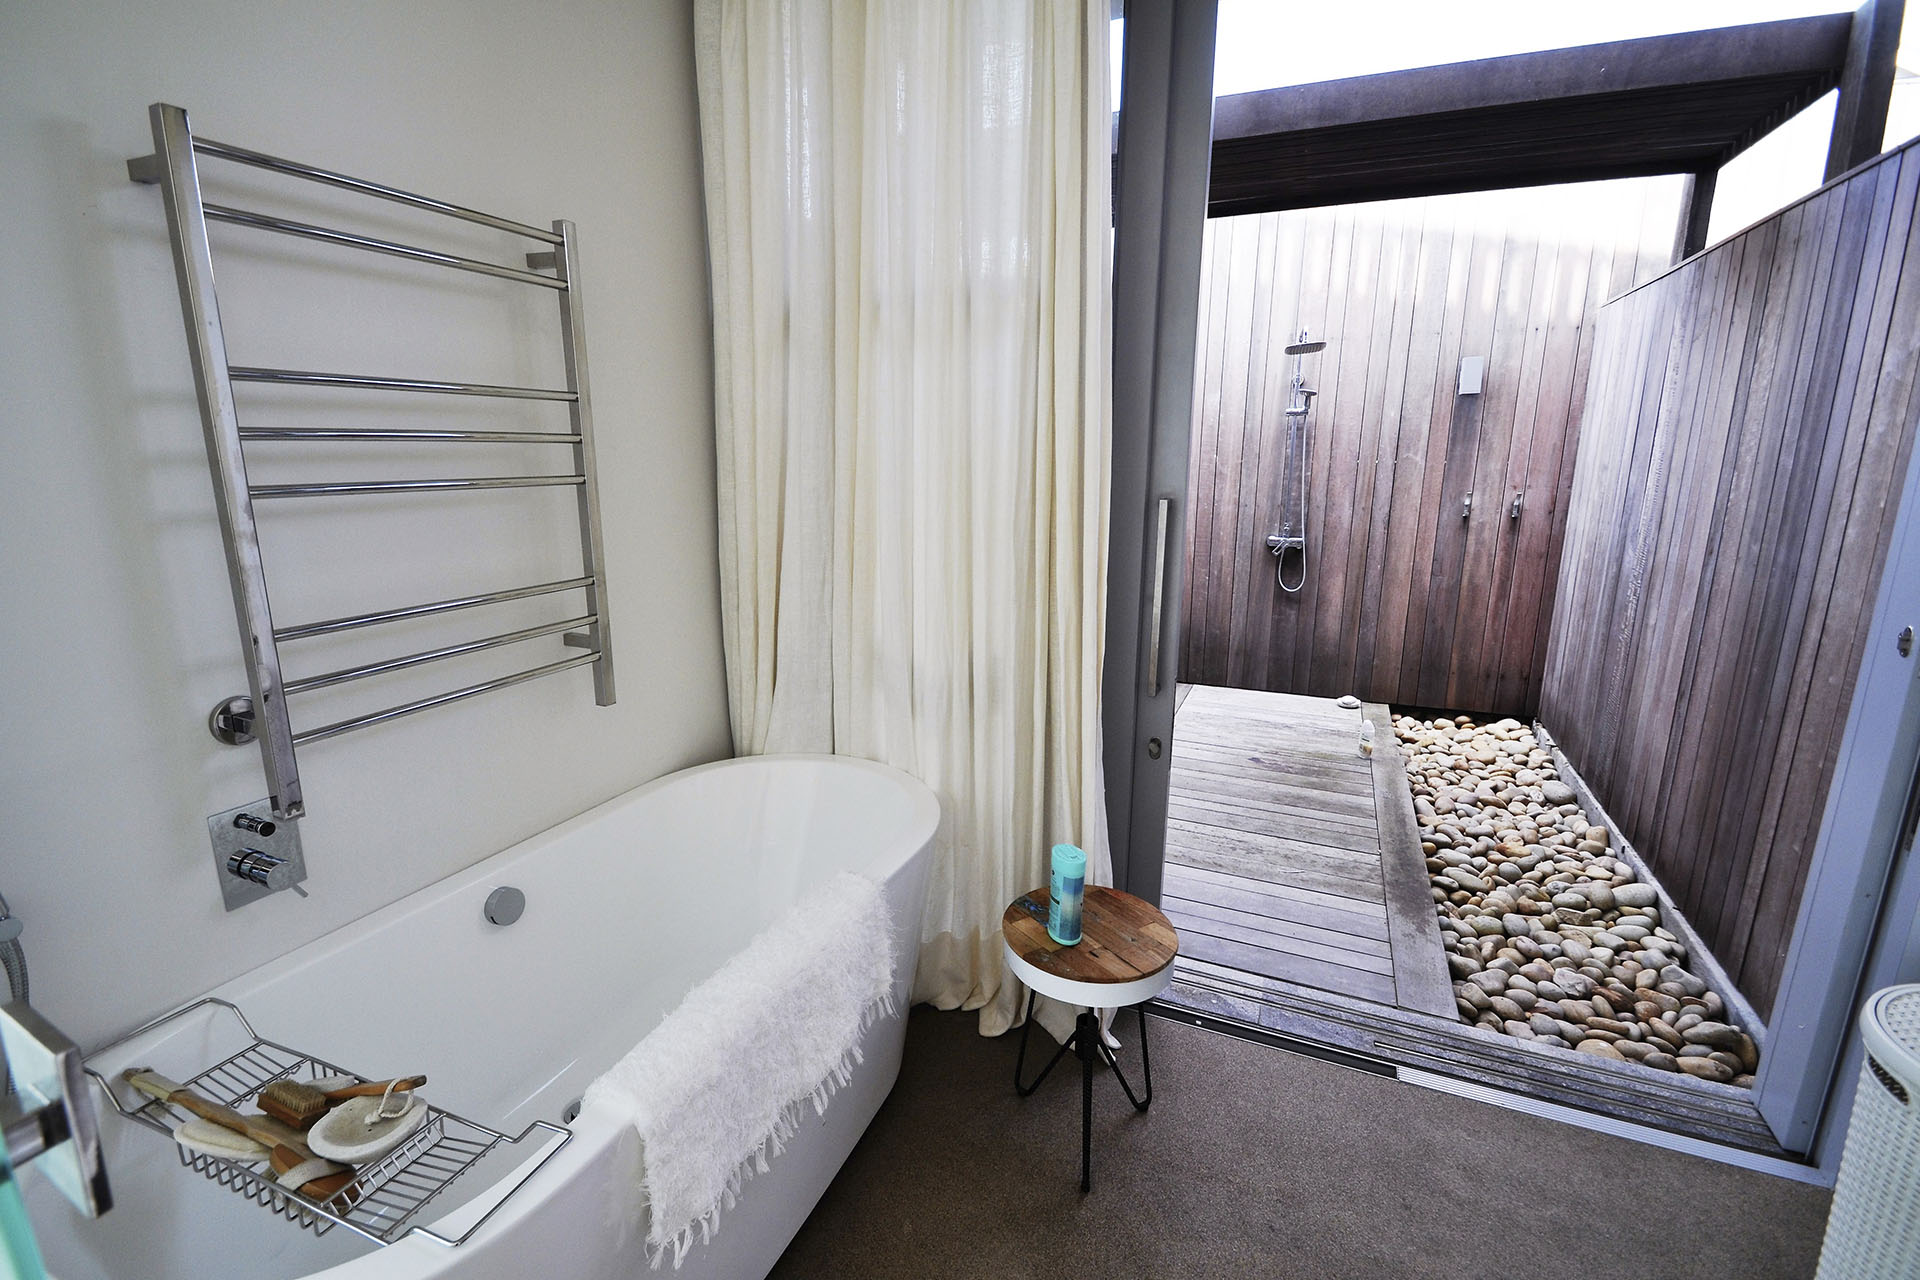 Photo 7 of The Dune House accommodation in Plettenberg Bay, Cape Town with 6 bedrooms and 7 bathrooms